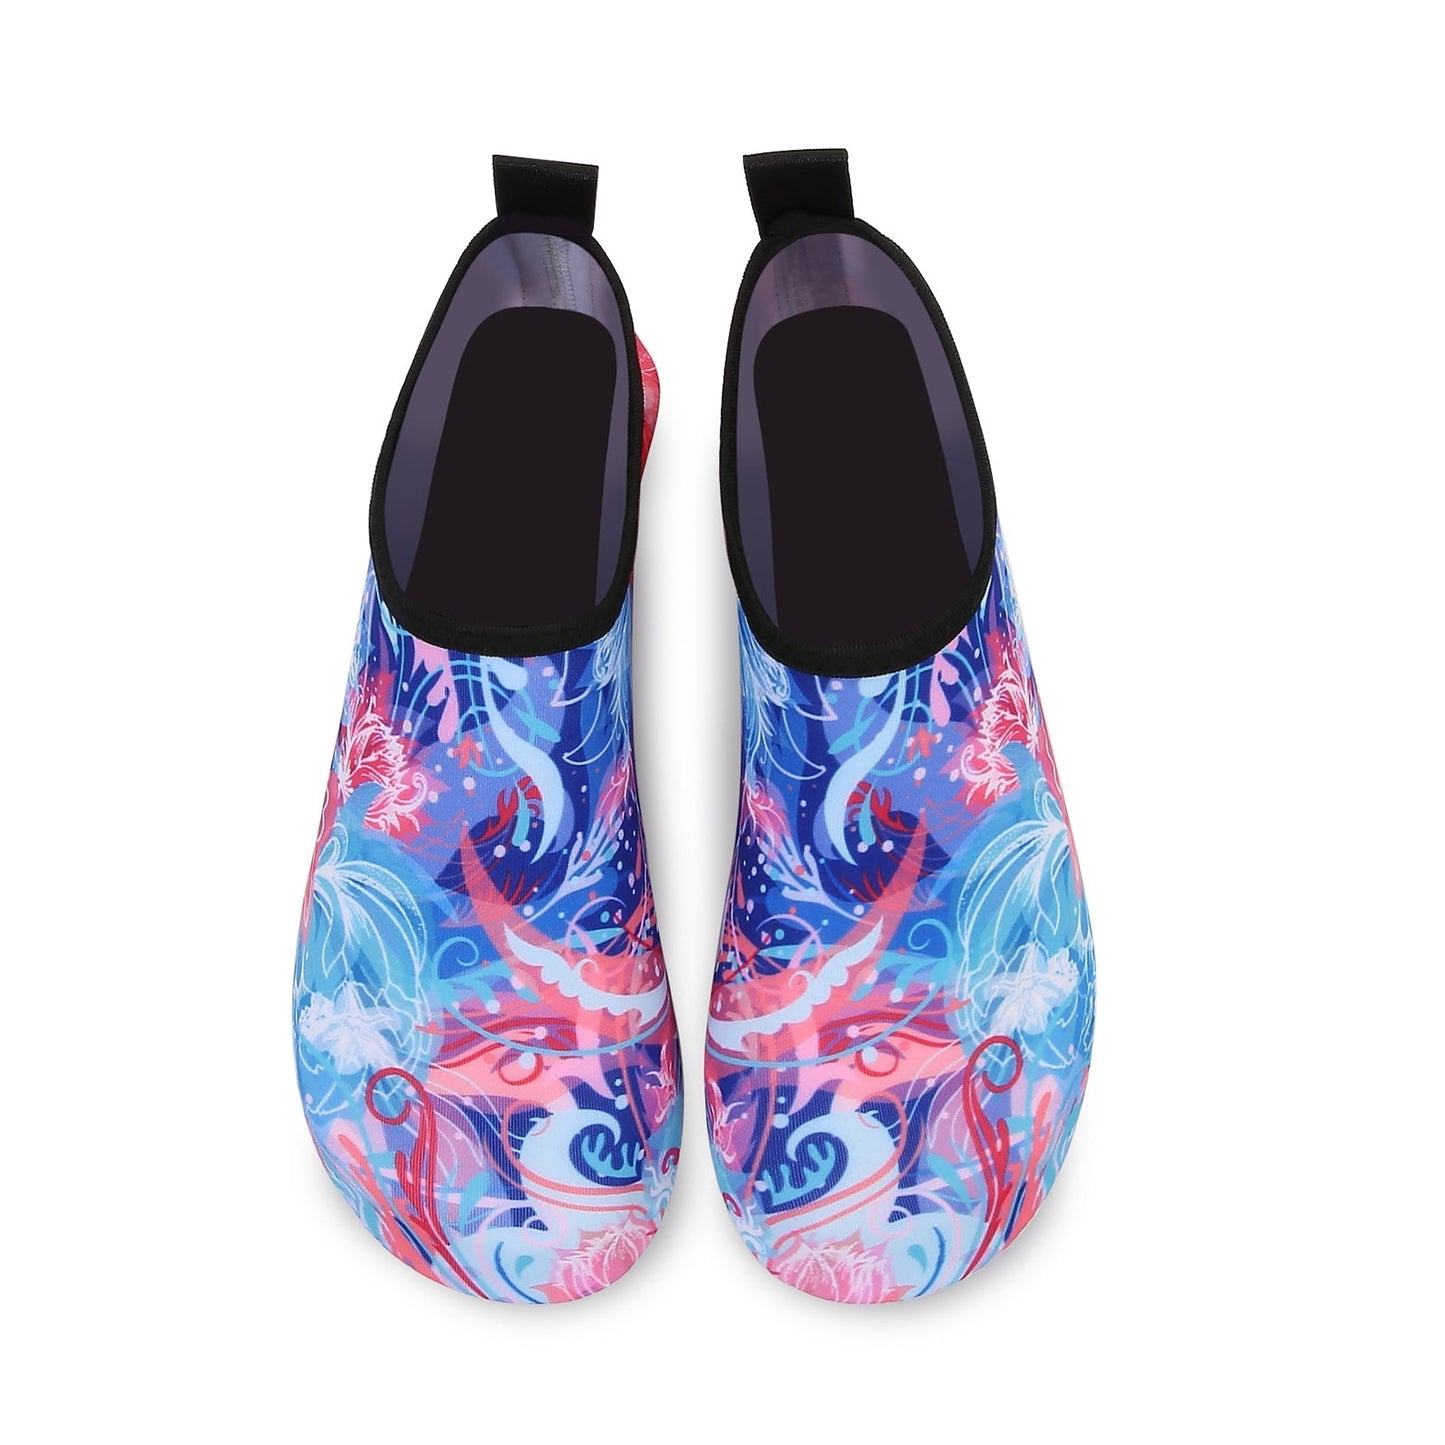 Men and Women a Slip On Barefoot Quick-Dry Beach Aqua Yoga Water Shoes (Floral/Pink Blue)